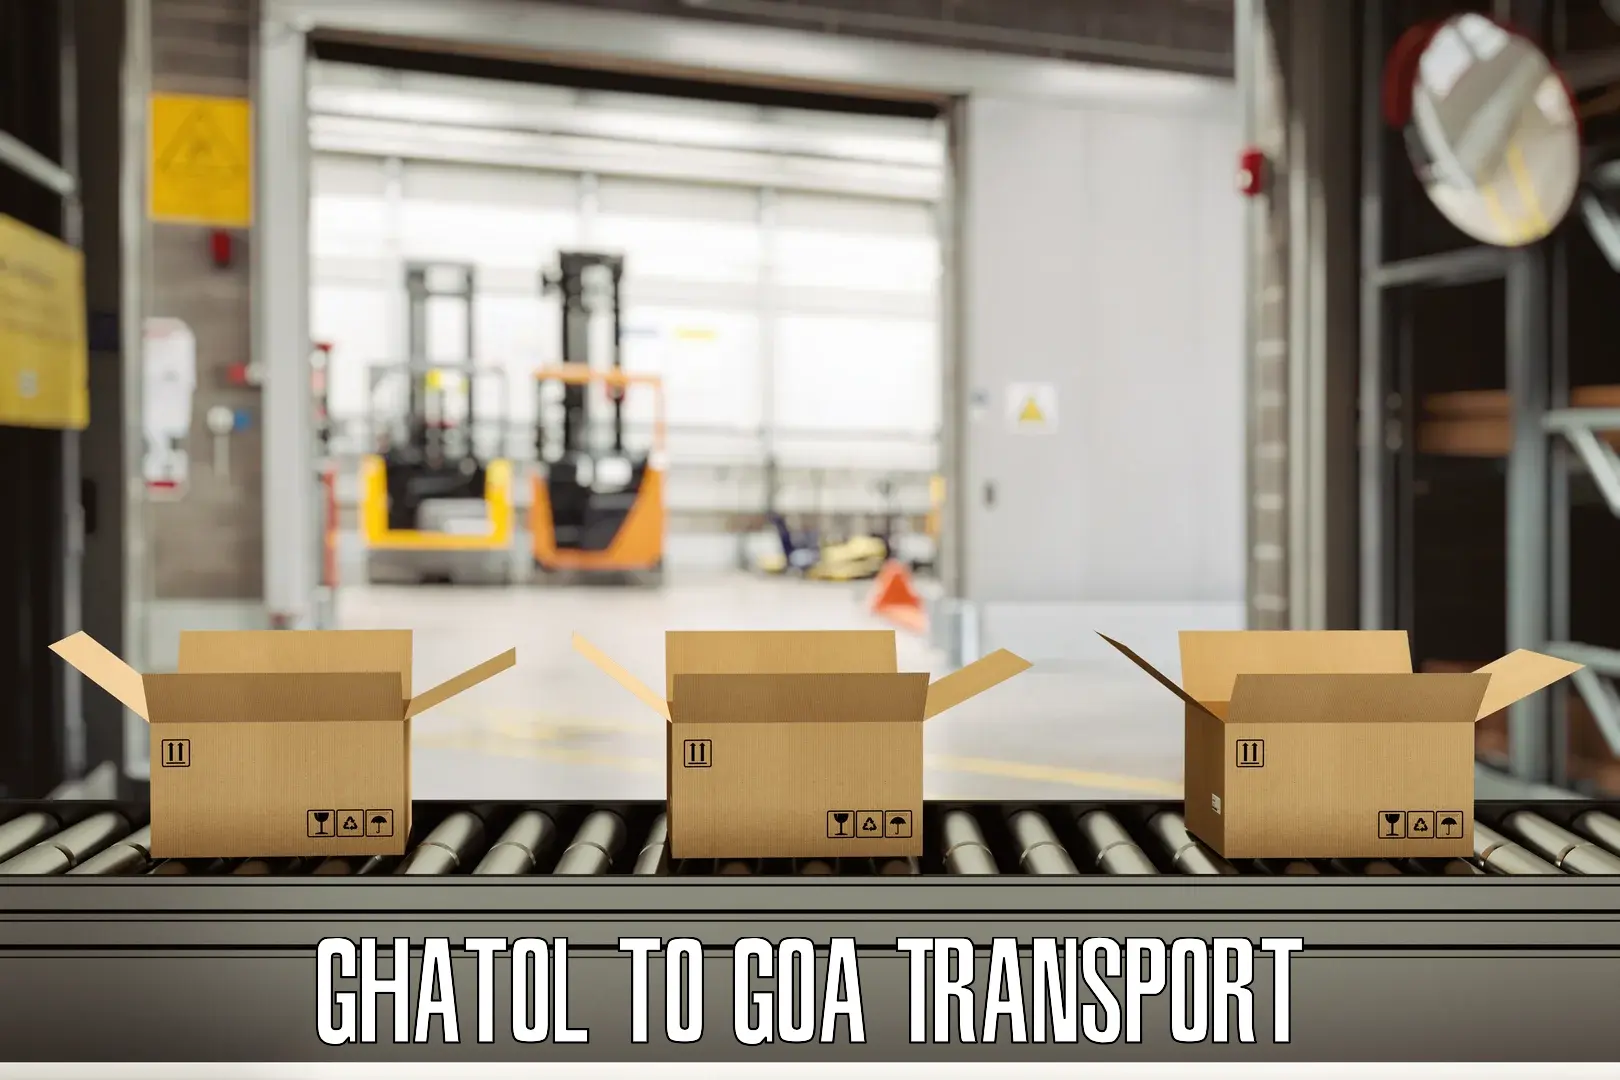 Delivery service Ghatol to Goa